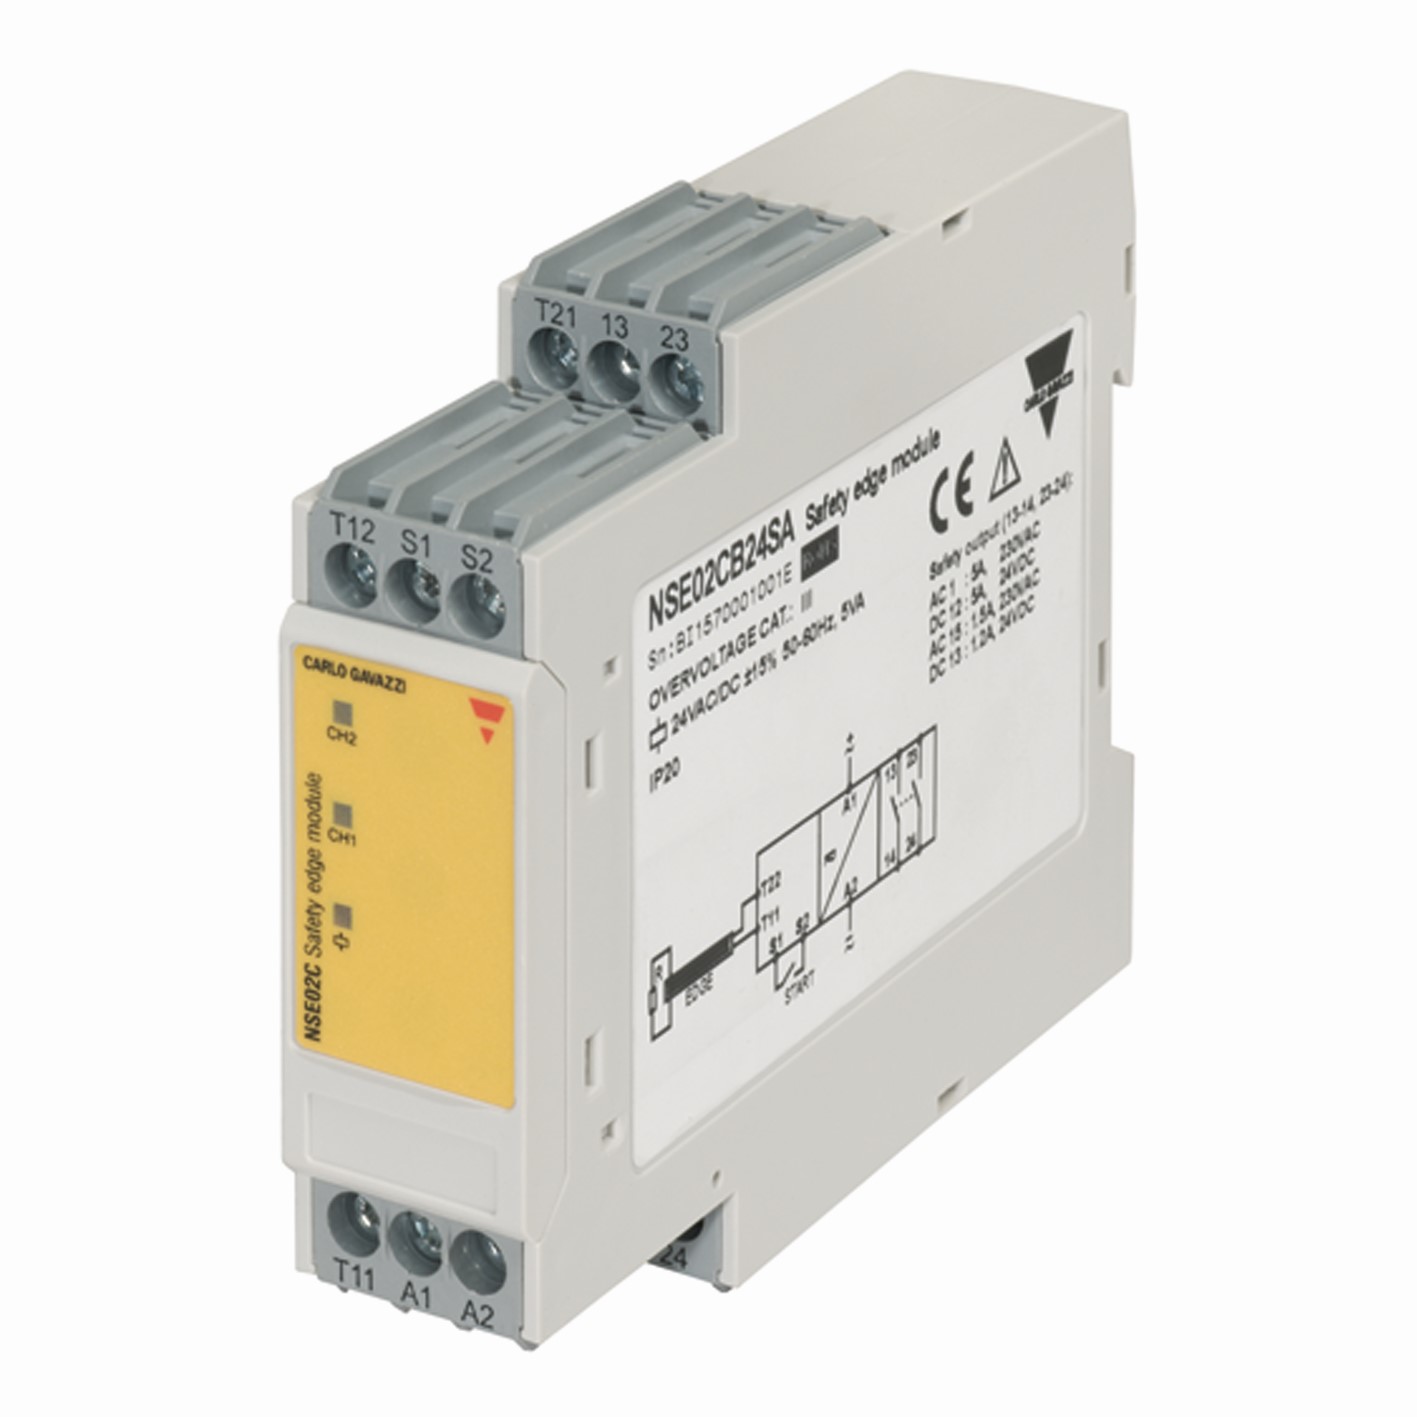 Relay Details about   Carlo Gavazzi RR2I4005HDPS108 